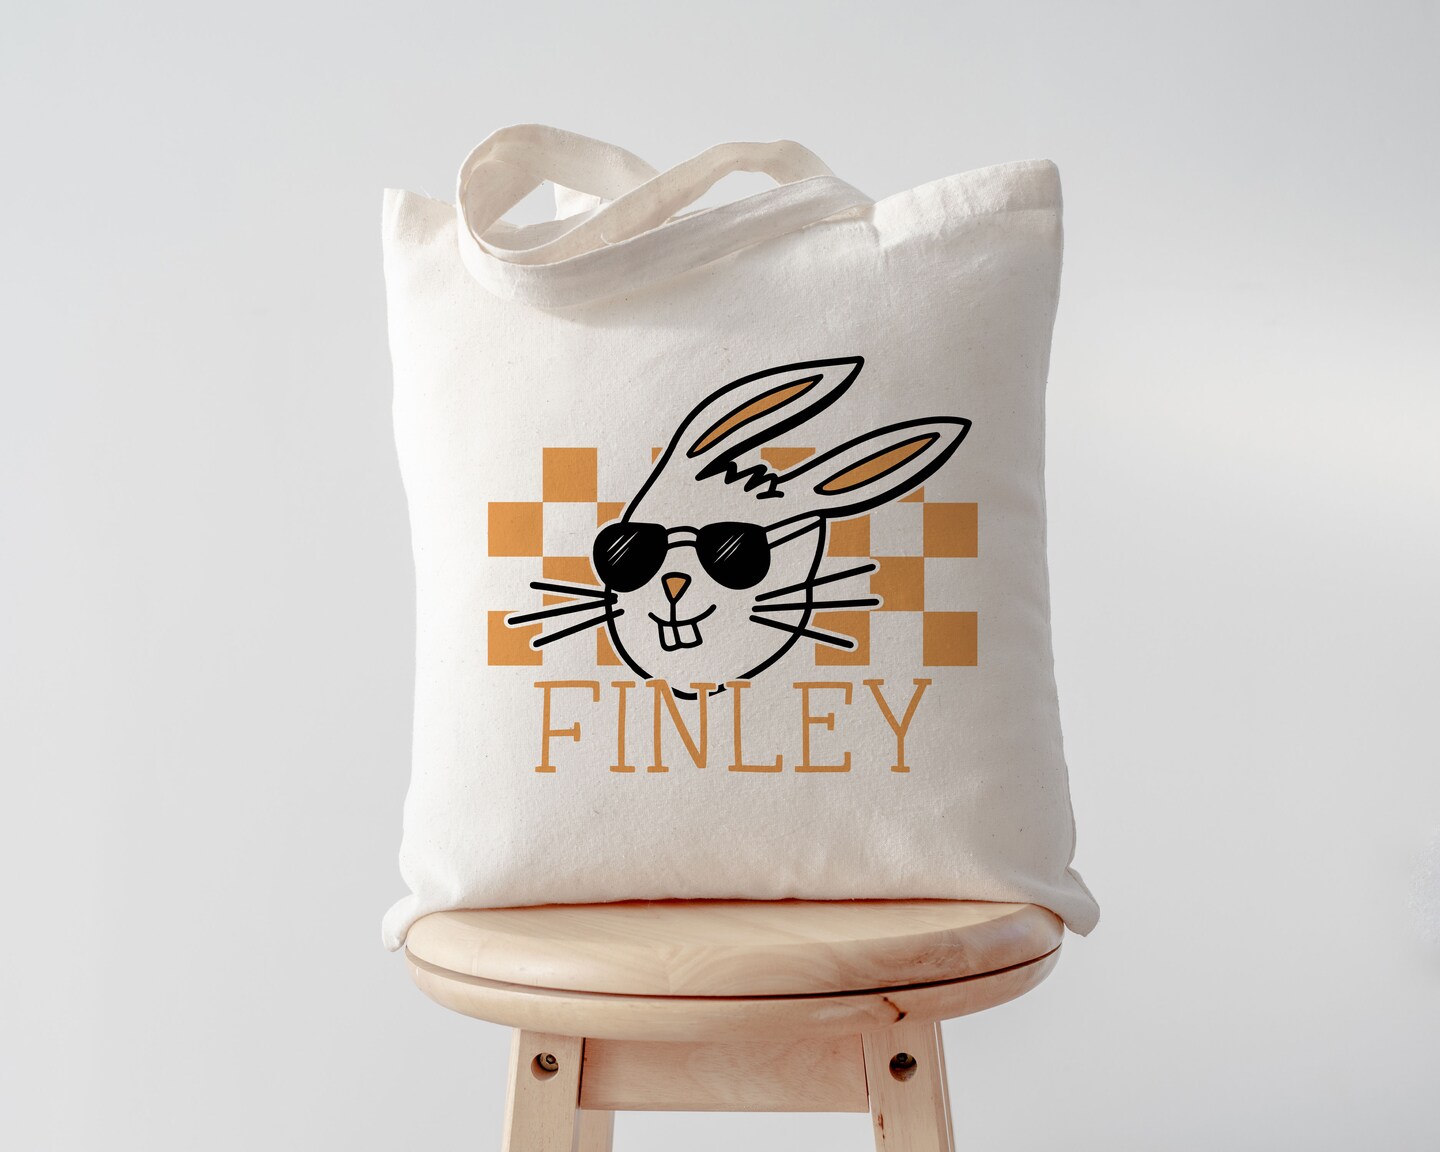 Easter Tote, Easter Egg Hunt, Personalized Easter Gift, Easter Gift Bag, Easter Bunny Tote, Easter Bucket Tote, Easter Bunny Bag 239564187059879936